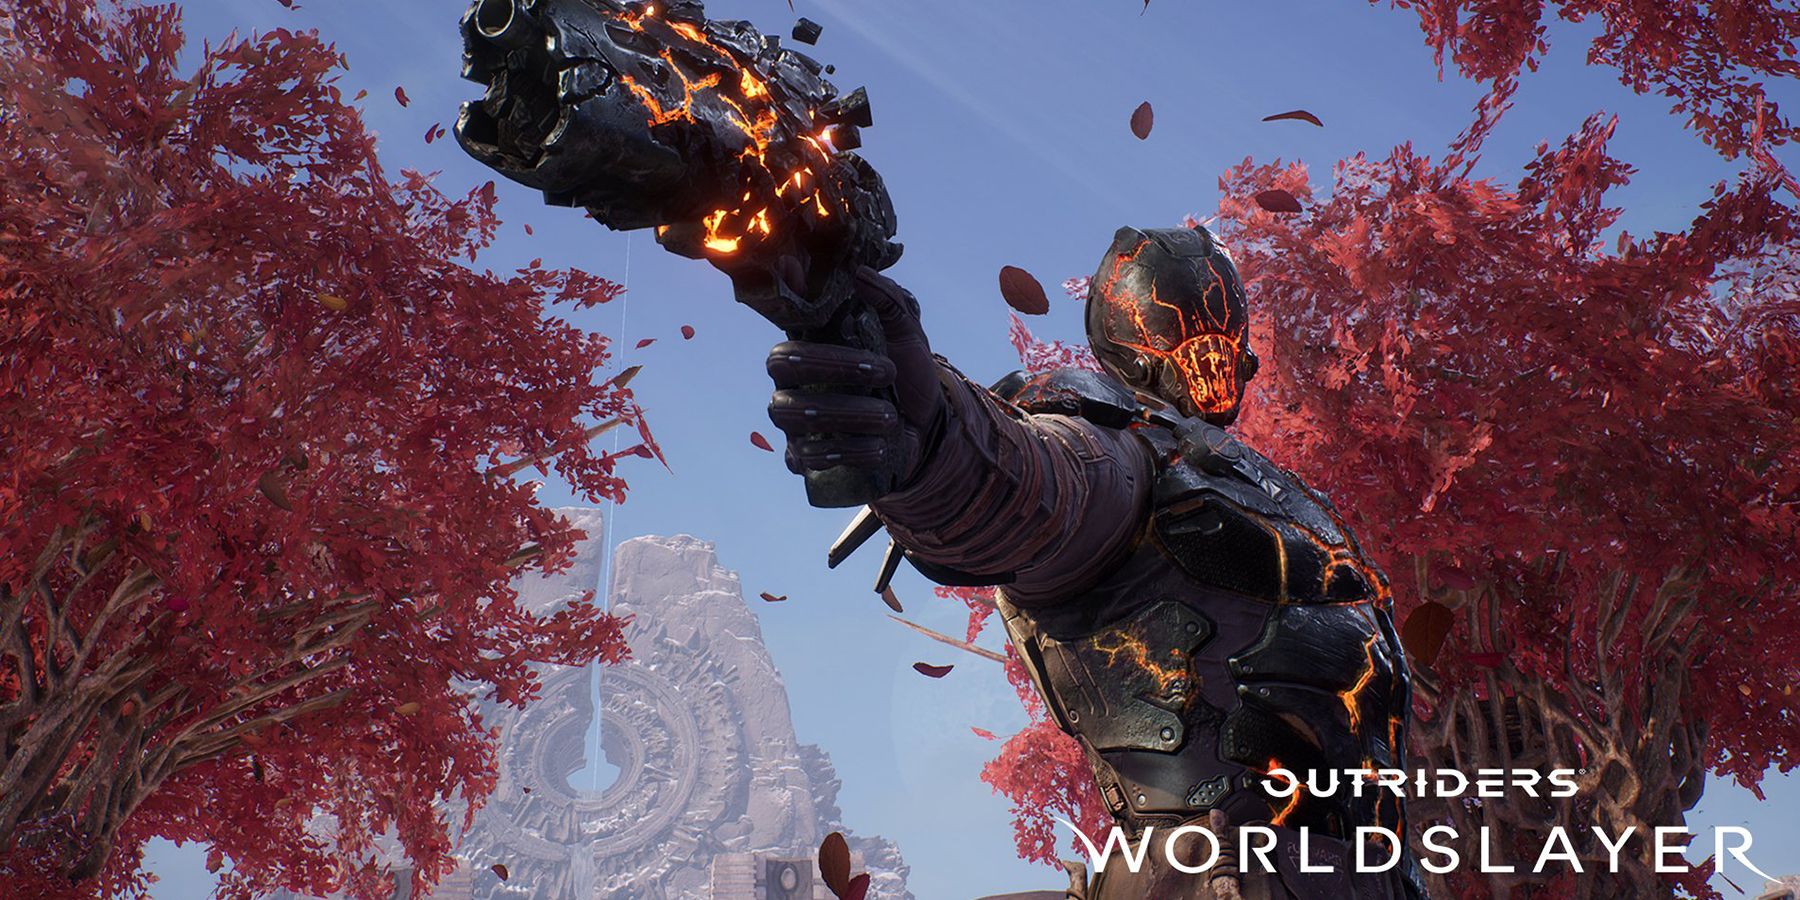 Outriders: Worldslayer's Apocalypse Weapons Explained